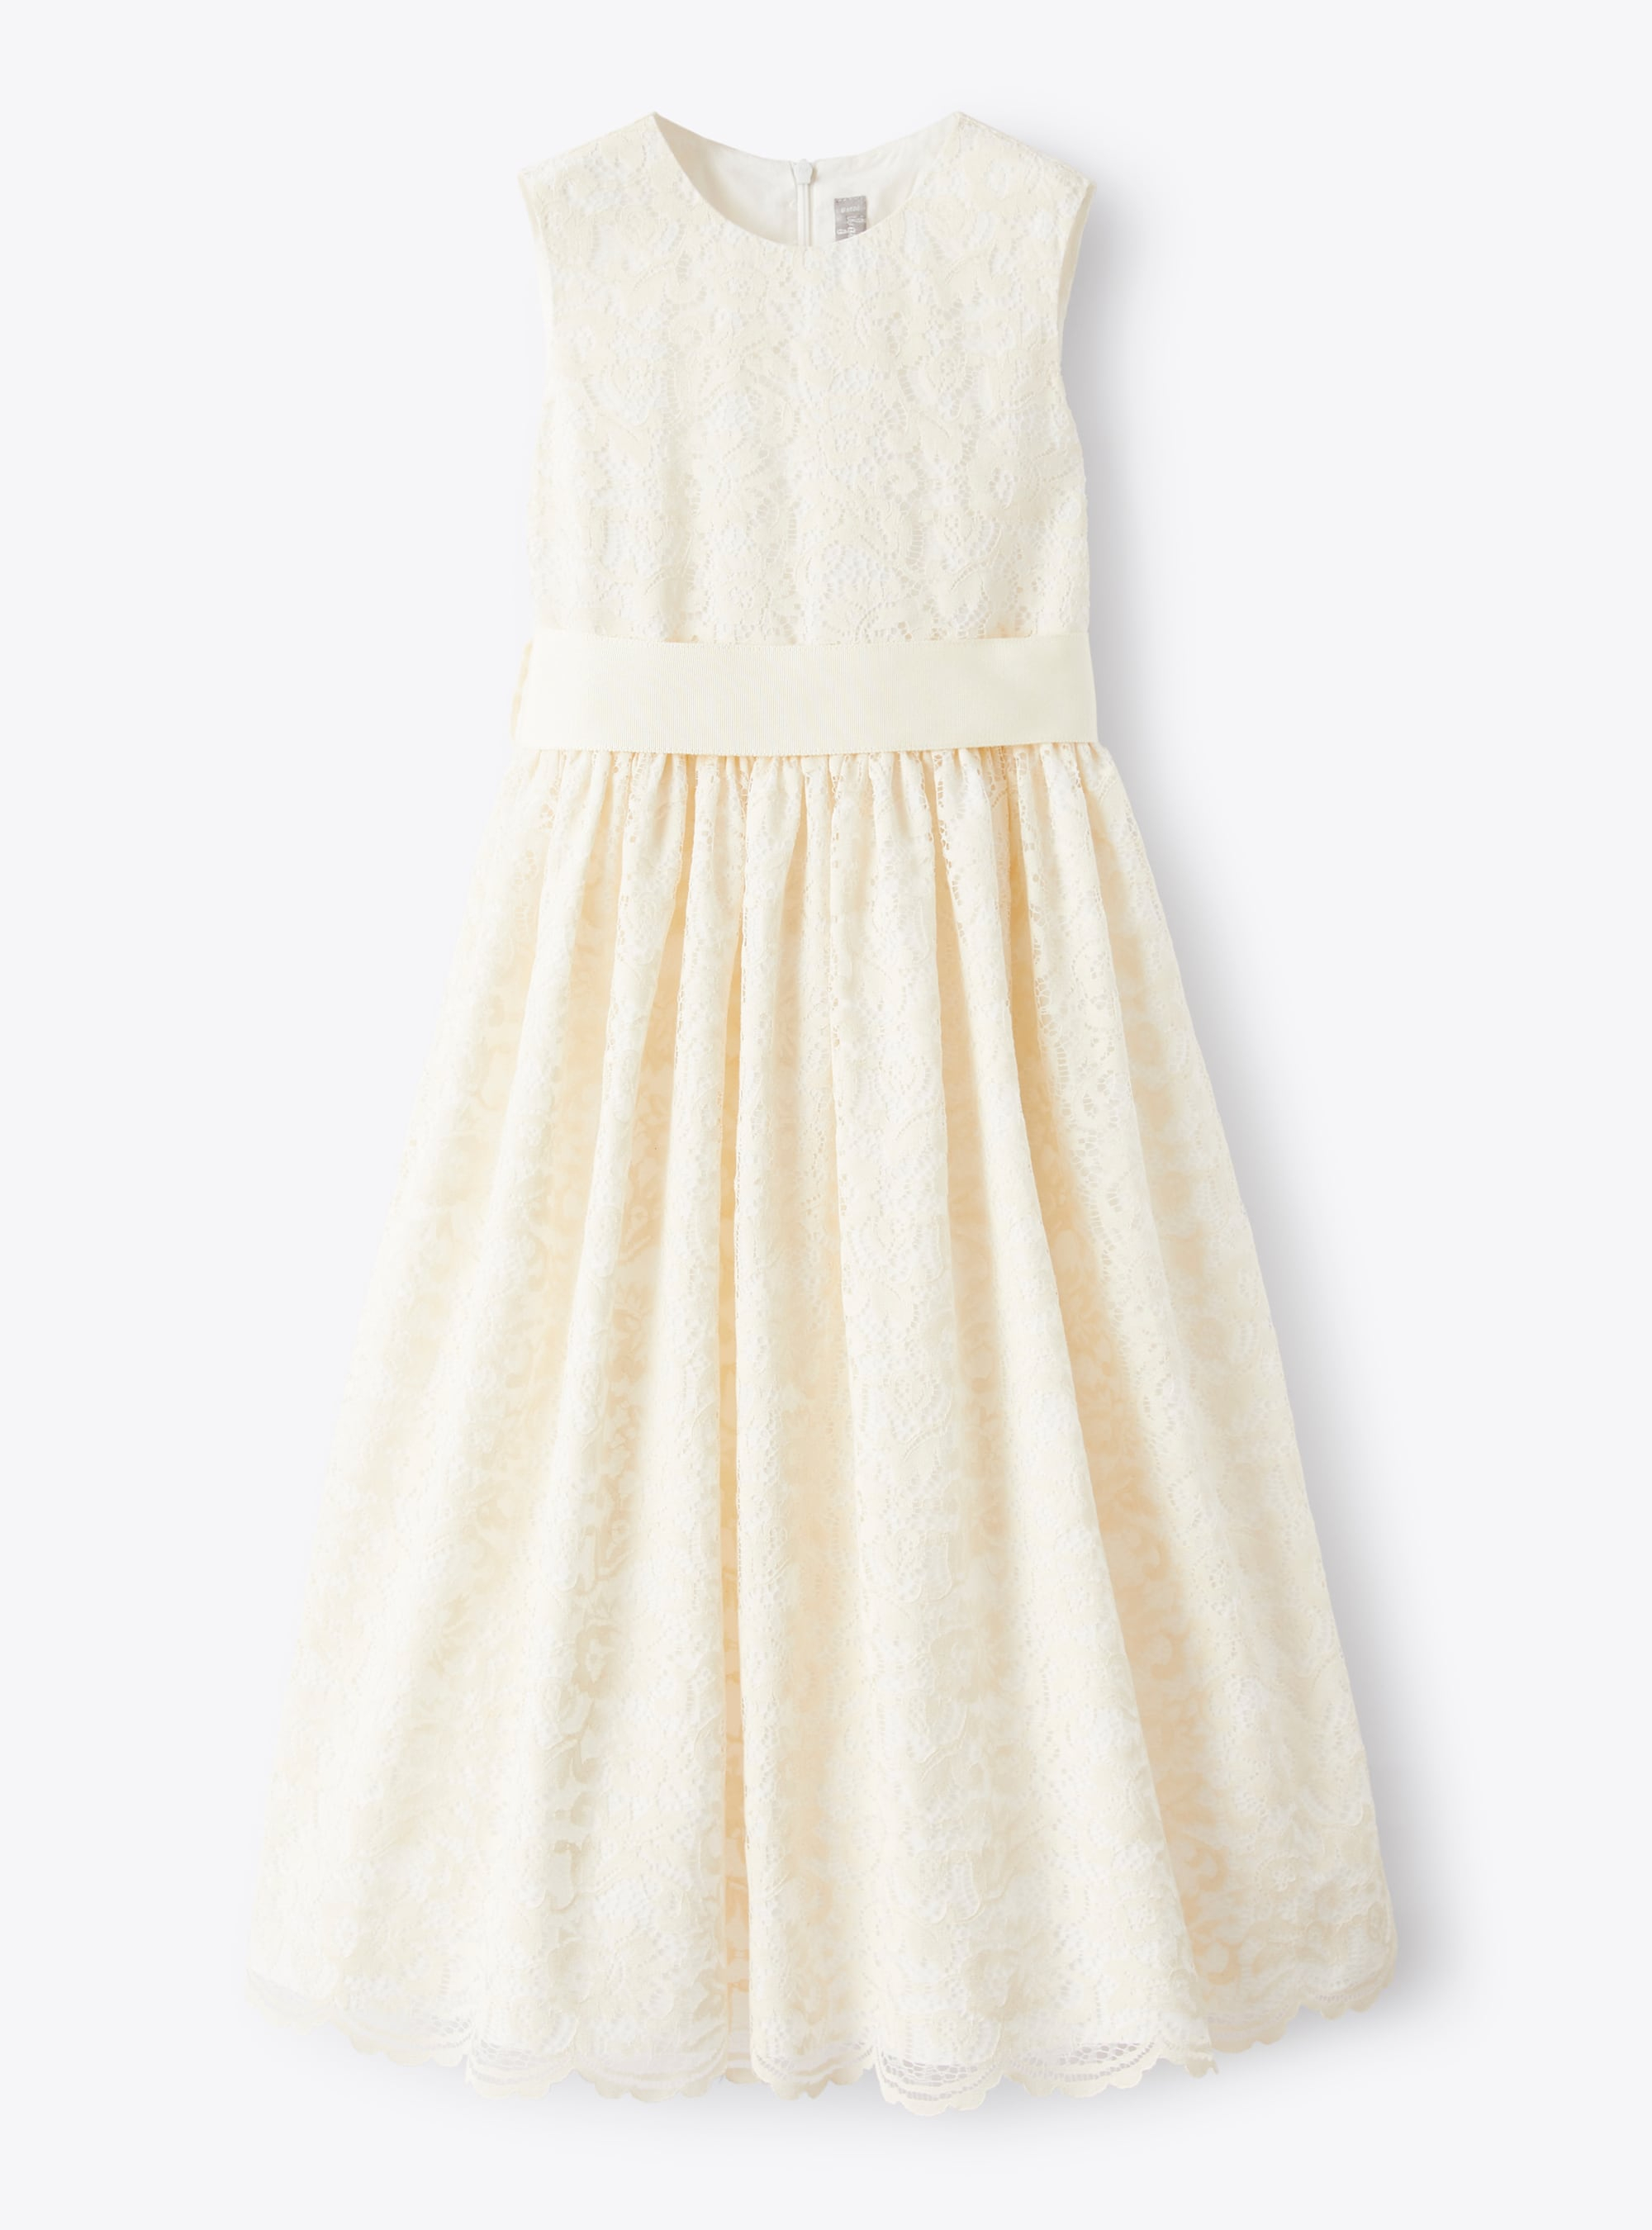 Sleeveless dress in lace with belt - Dresses - Il Gufo